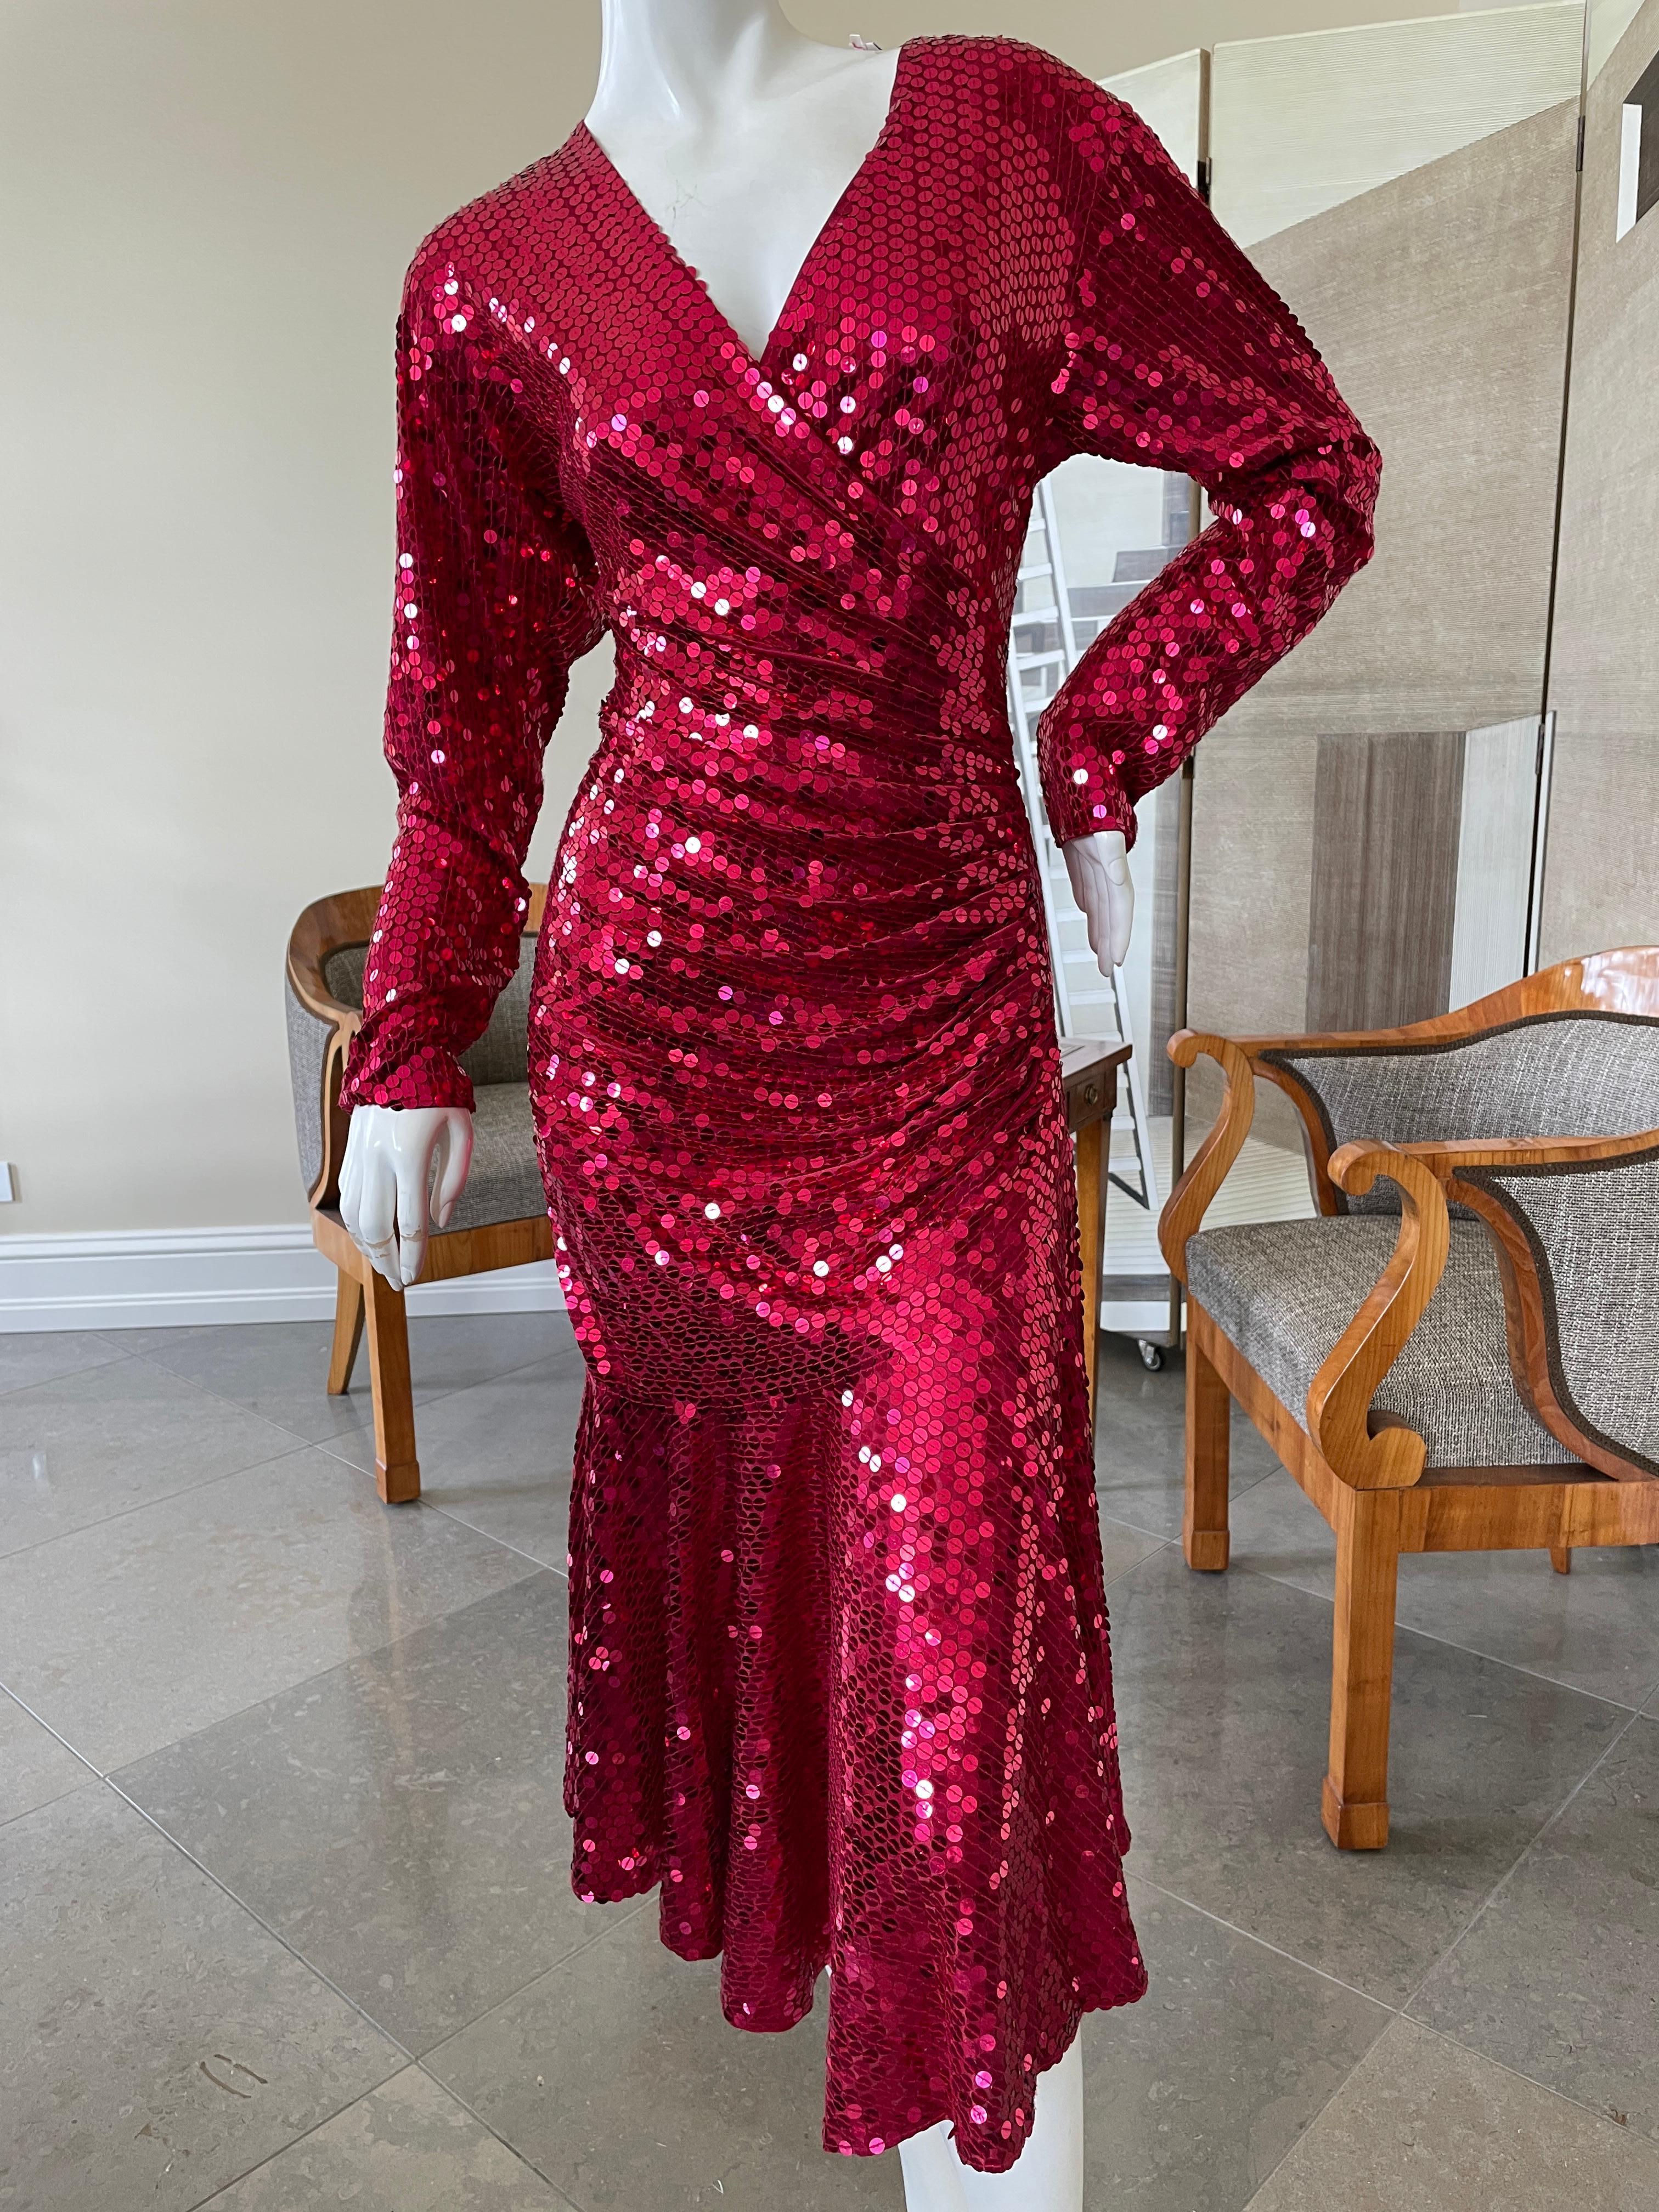 Oleg Cassini 1970's Sequin Disco Era Dress.
This is such a classic example of disco dressing.
Vintage size 8
Bust 38